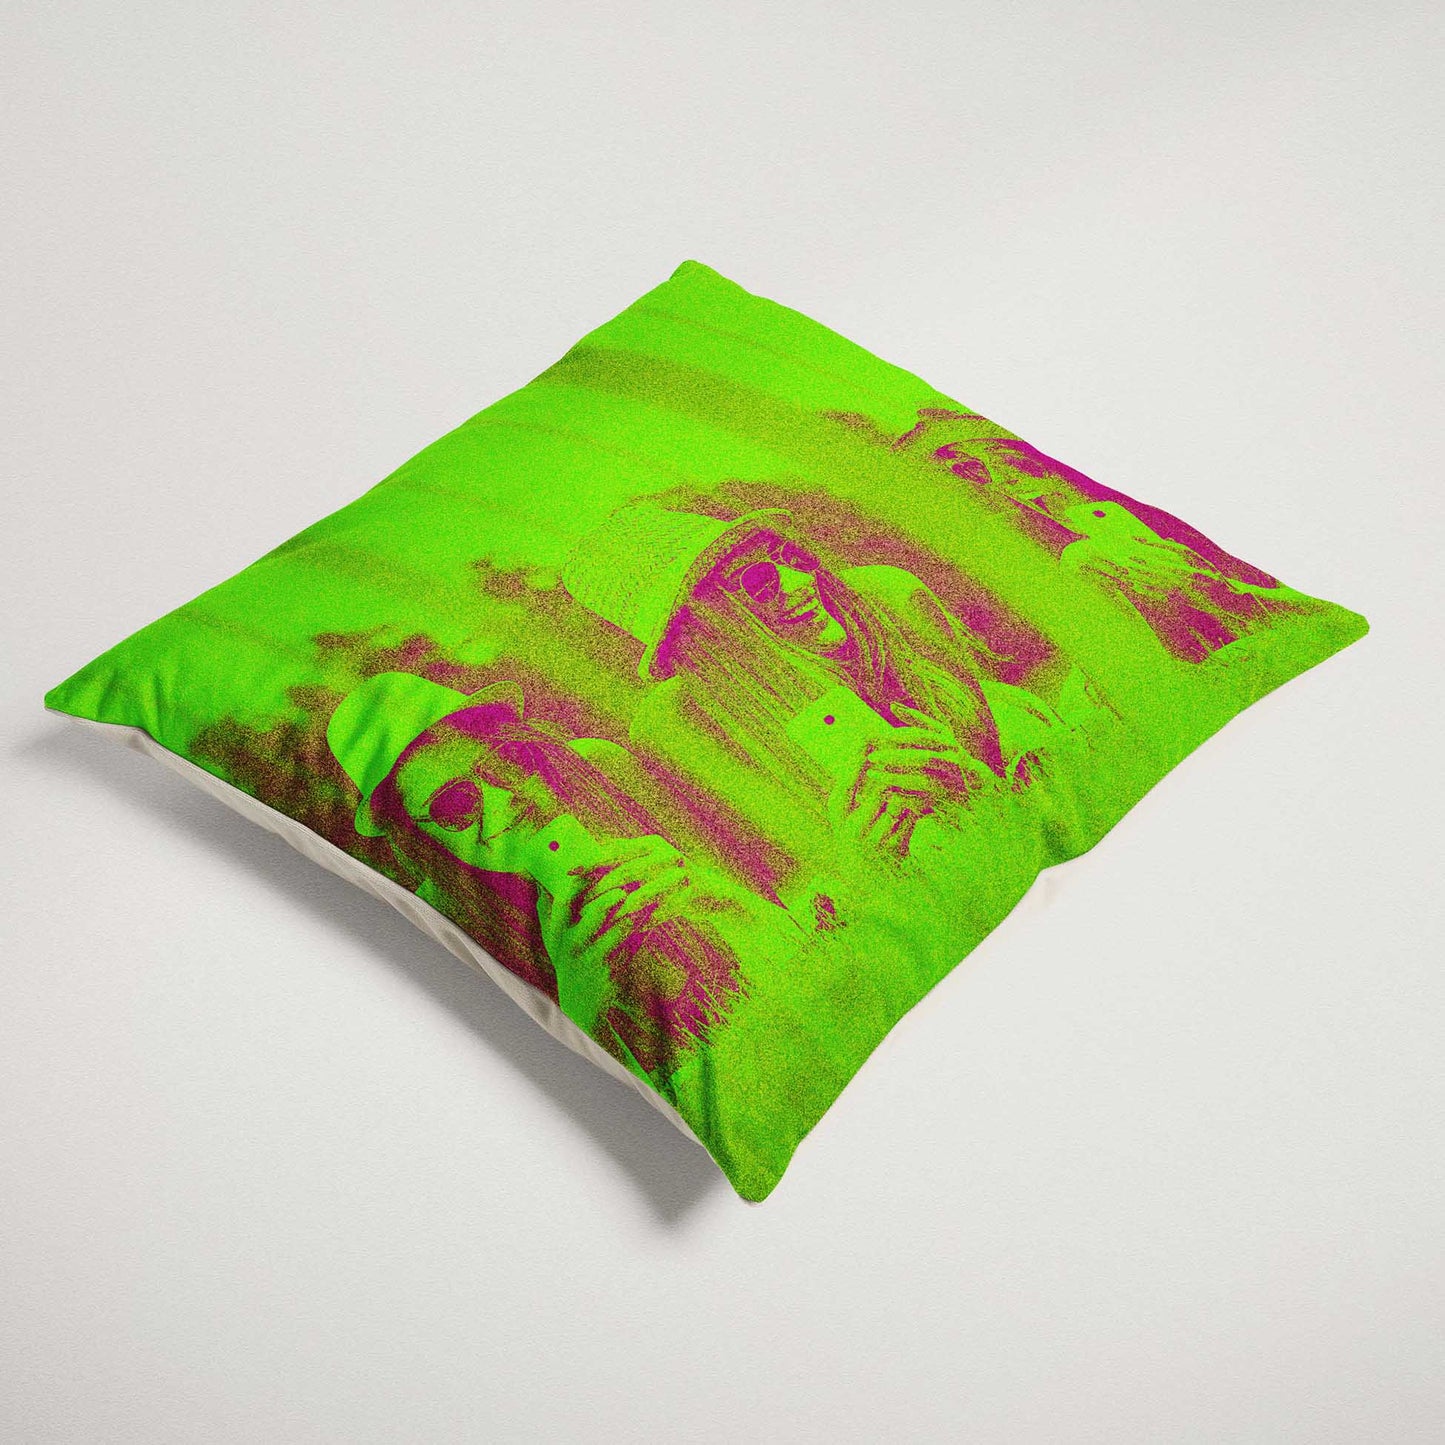 Transform your home into a vibrant and lively space with the Personalised Neon Green Cushion. Its fresh and fun design radiates coolness and sets the stage for a party-like atmosphere. Made from soft velvet and lovingly handmade